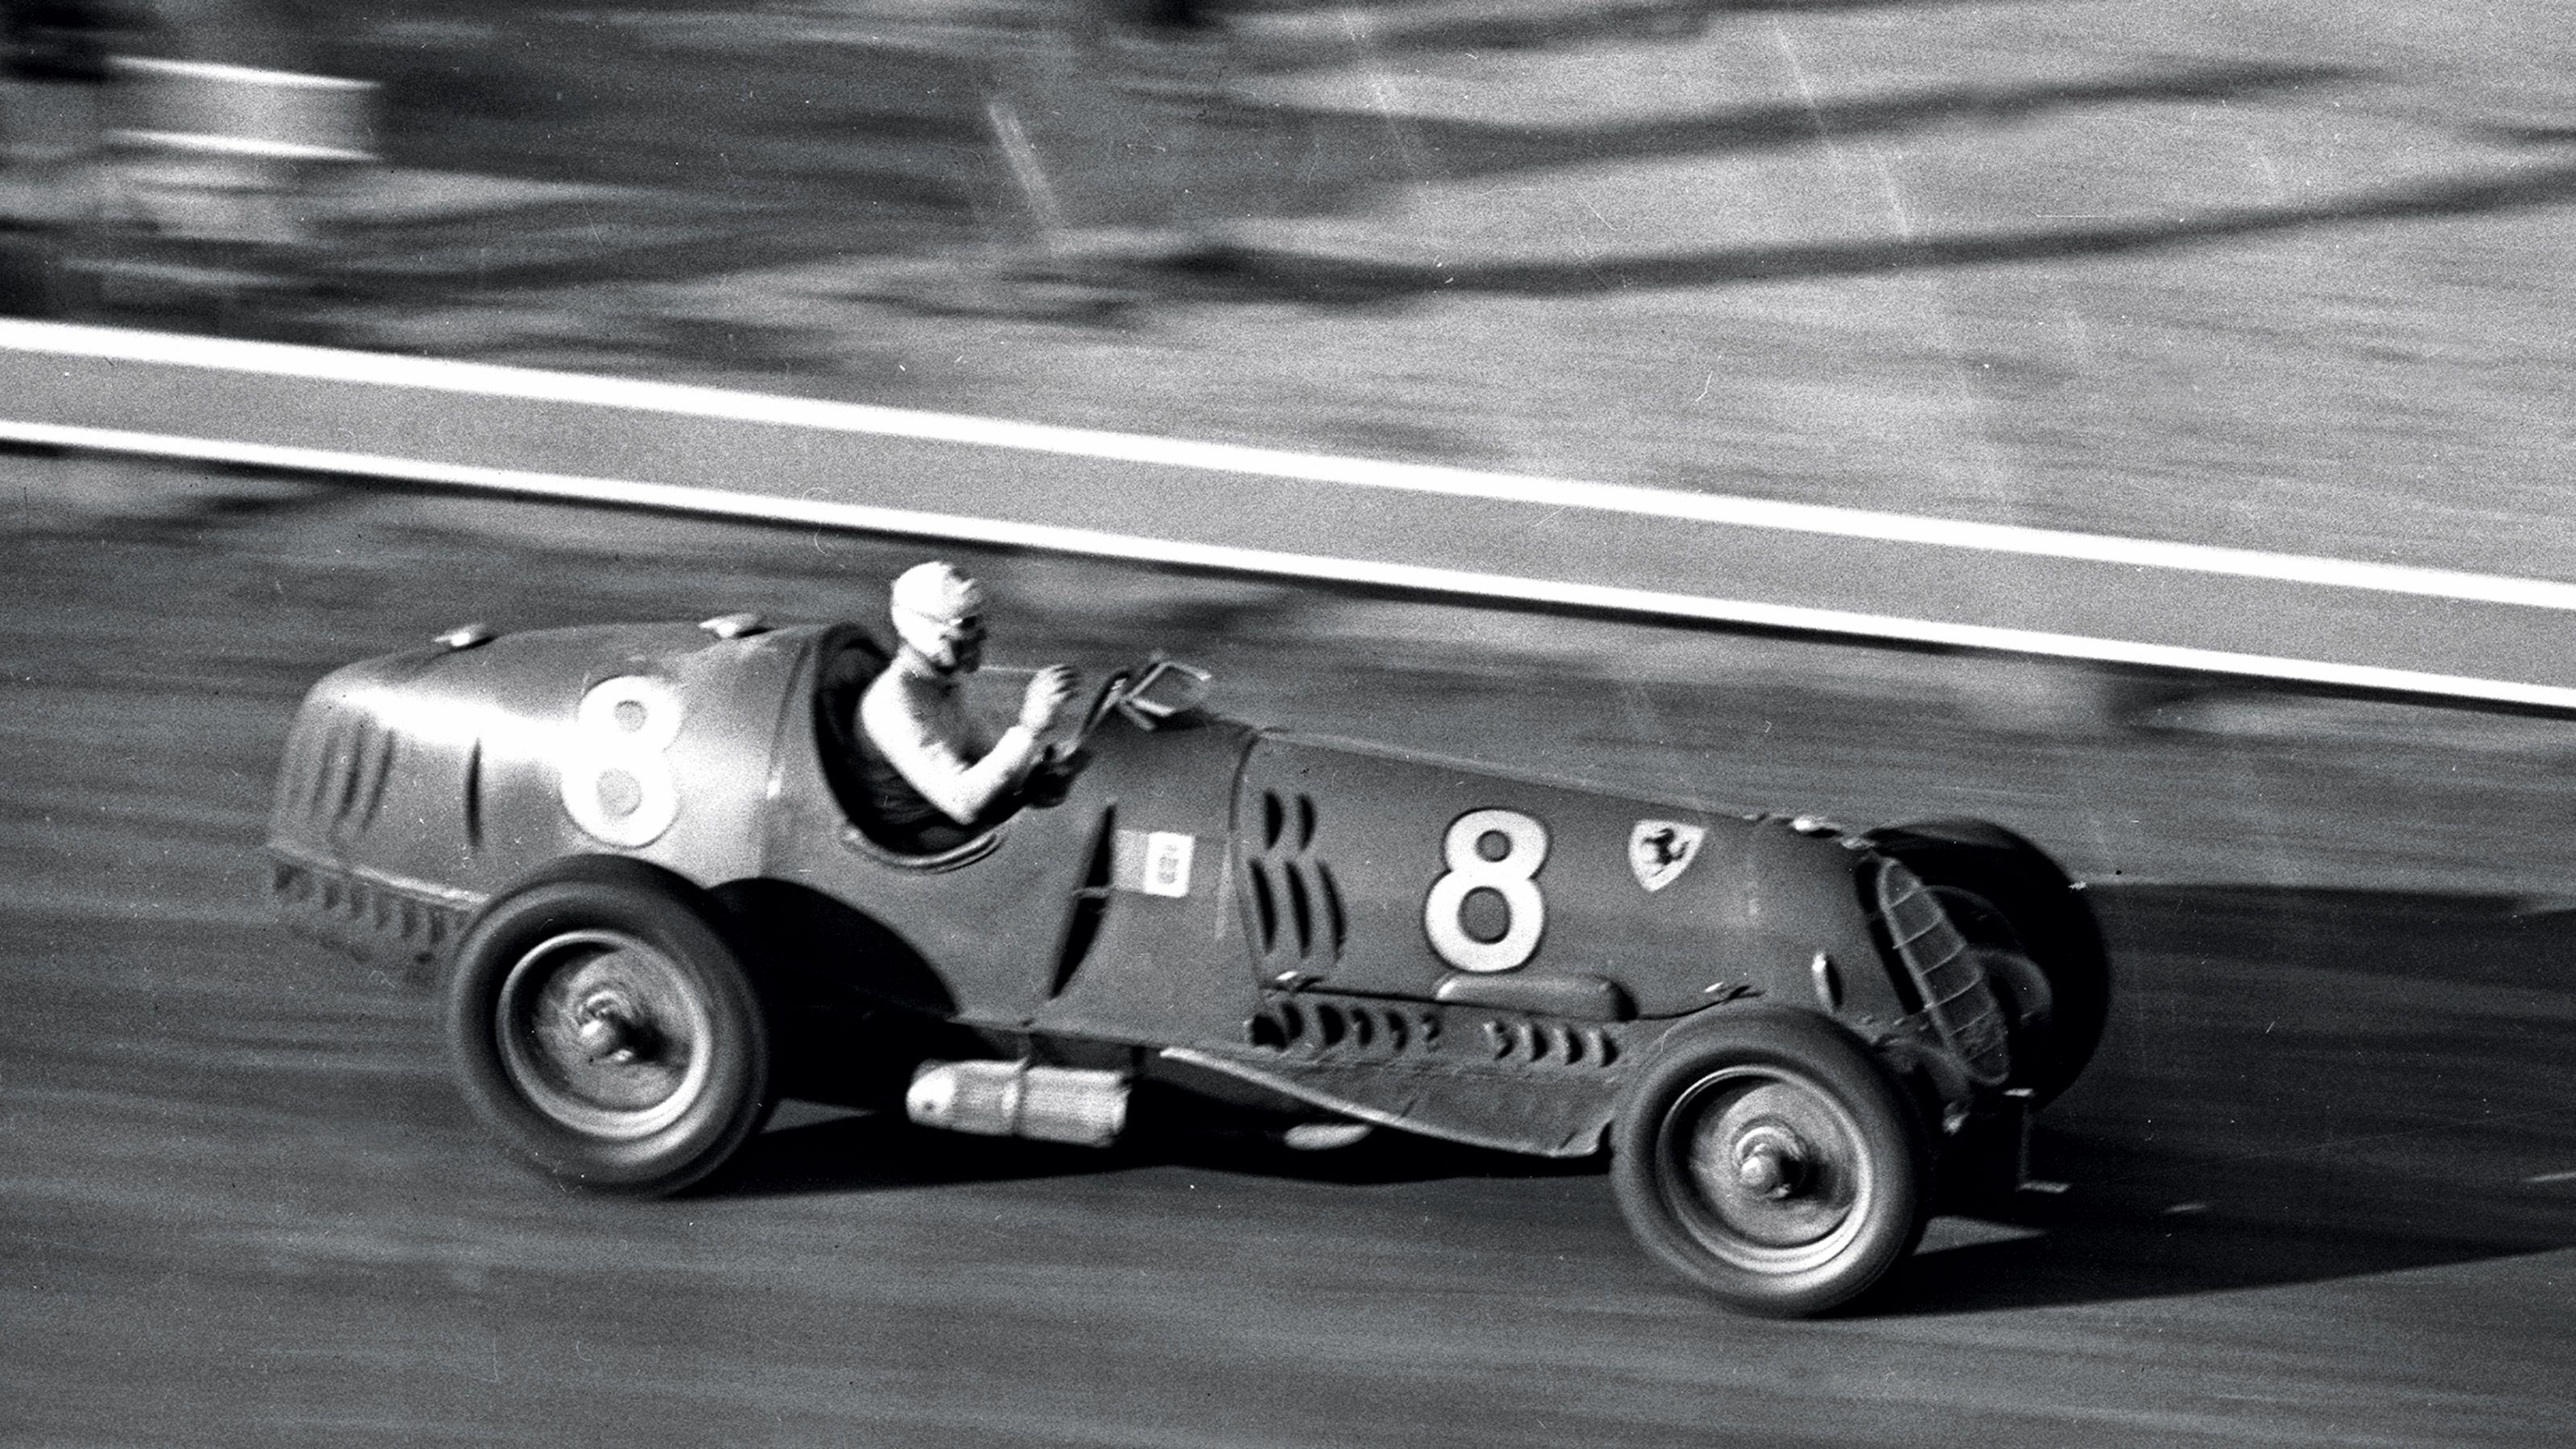 Enzo Ferrari started racing at 20 years old